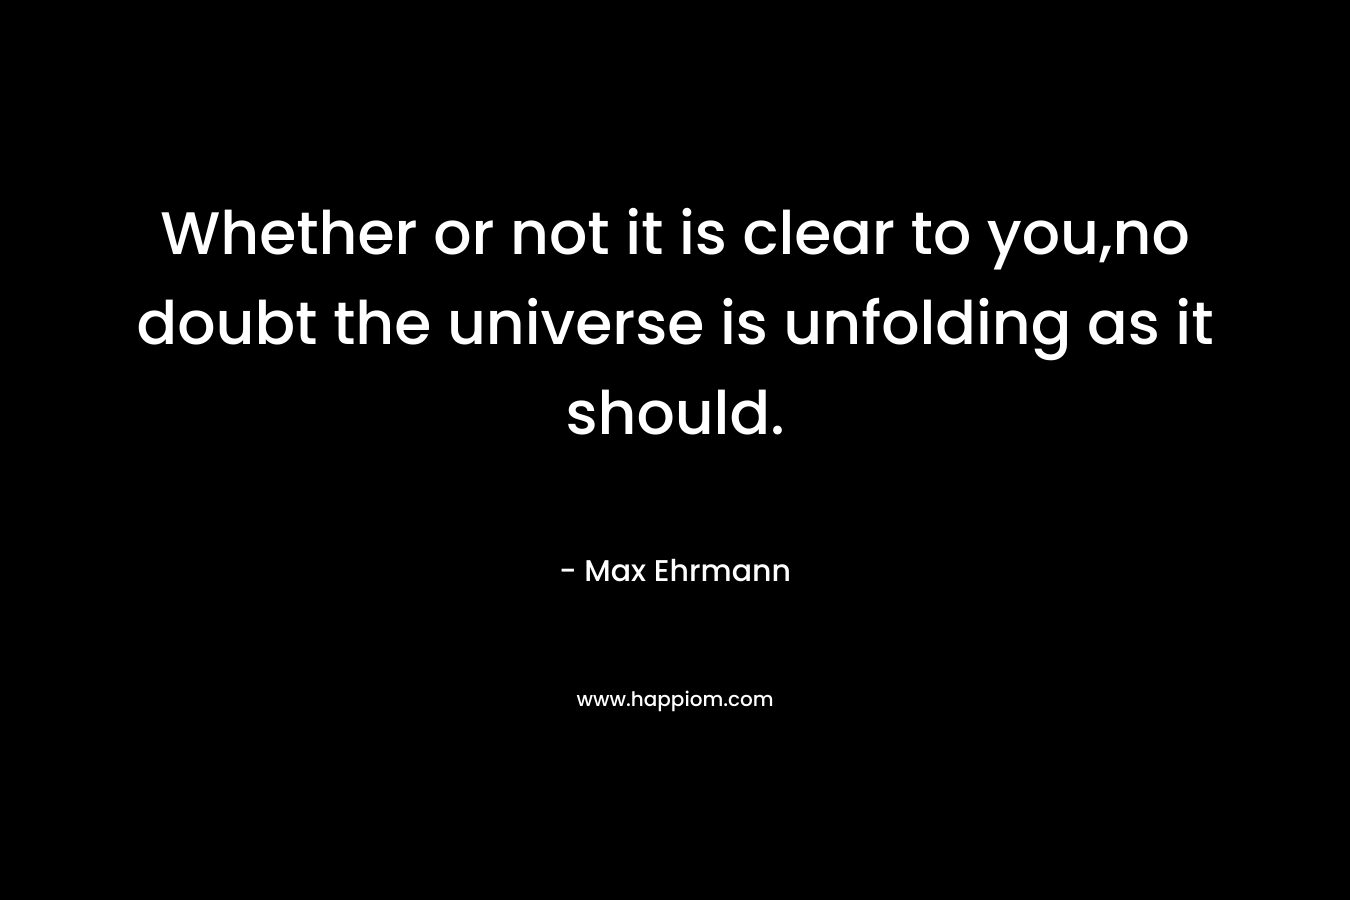 Whether or not it is clear to you,no doubt the universe is unfolding as it should.